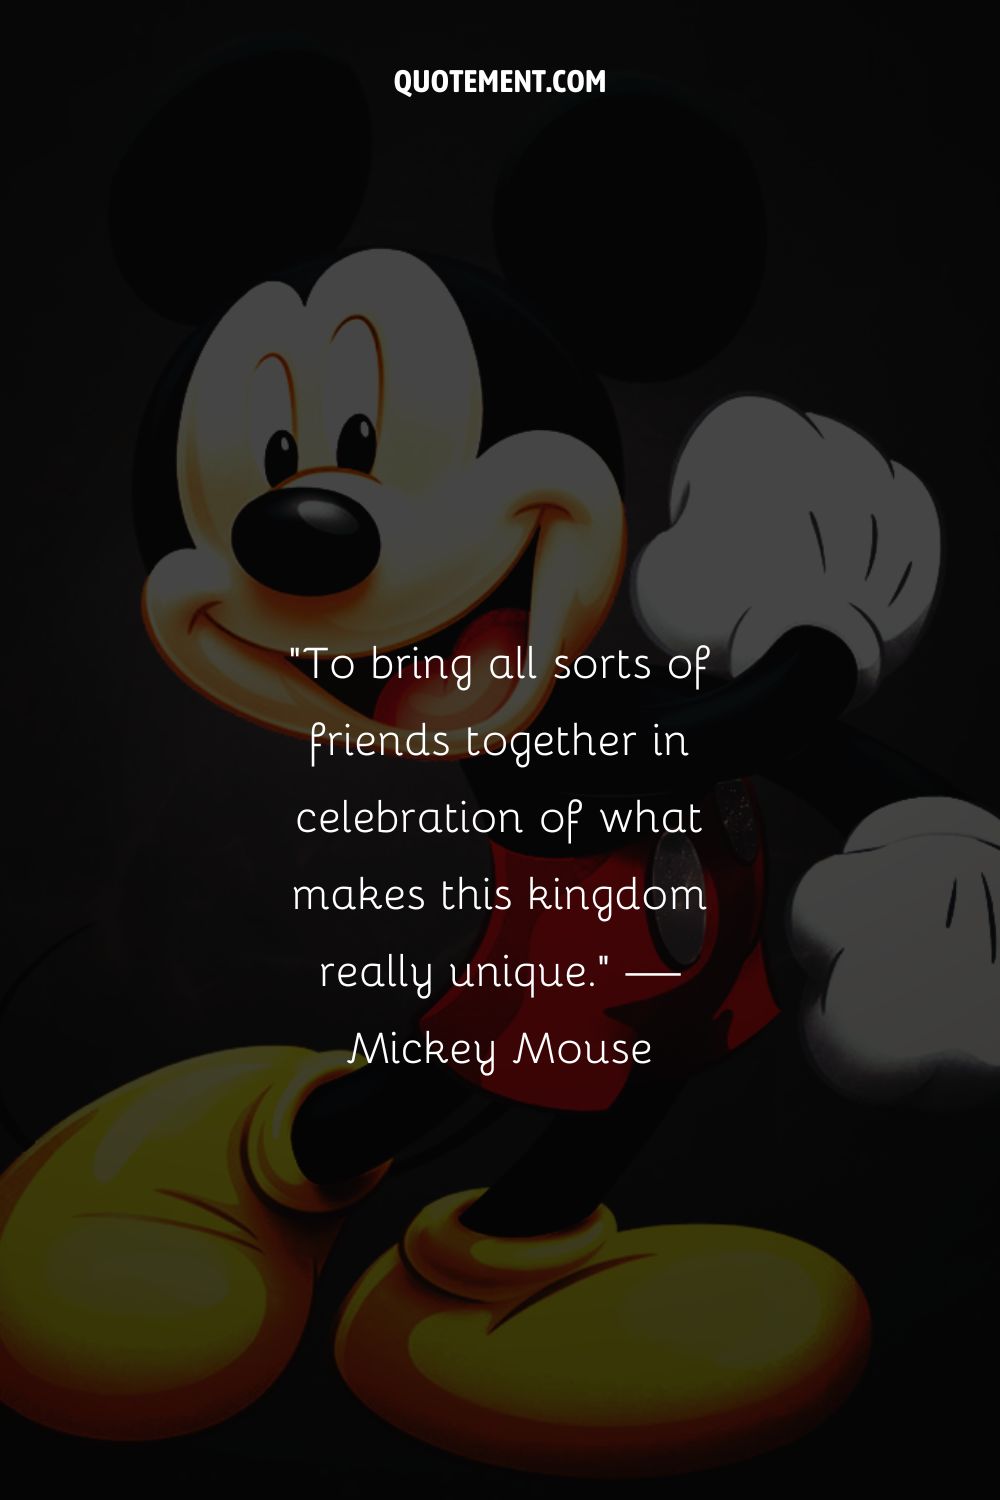 A cheerful Mickey Mouse set against a dark background
